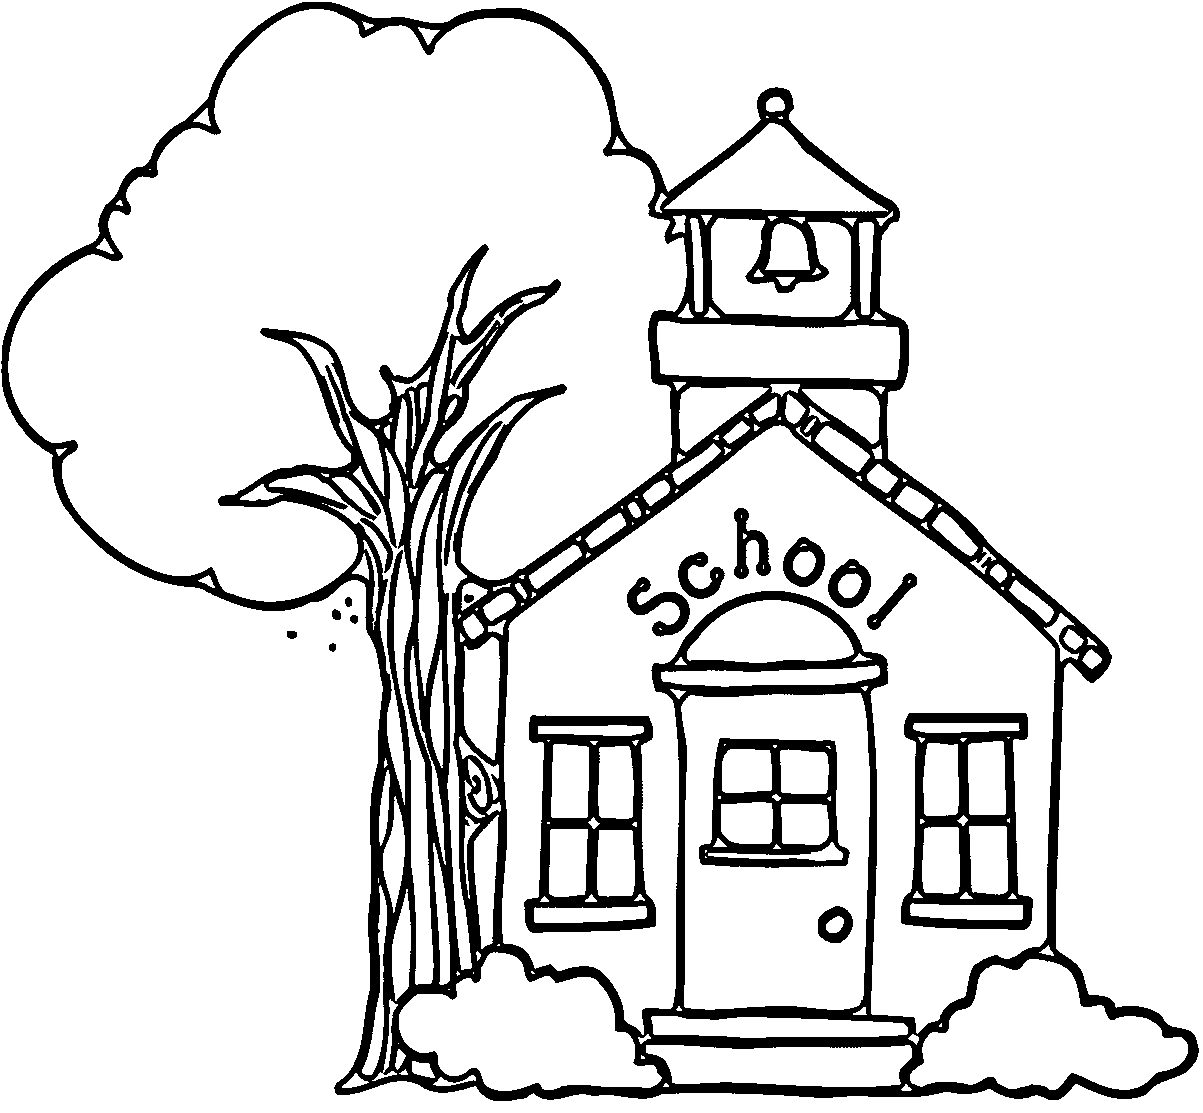 easy-school-coloring-pages